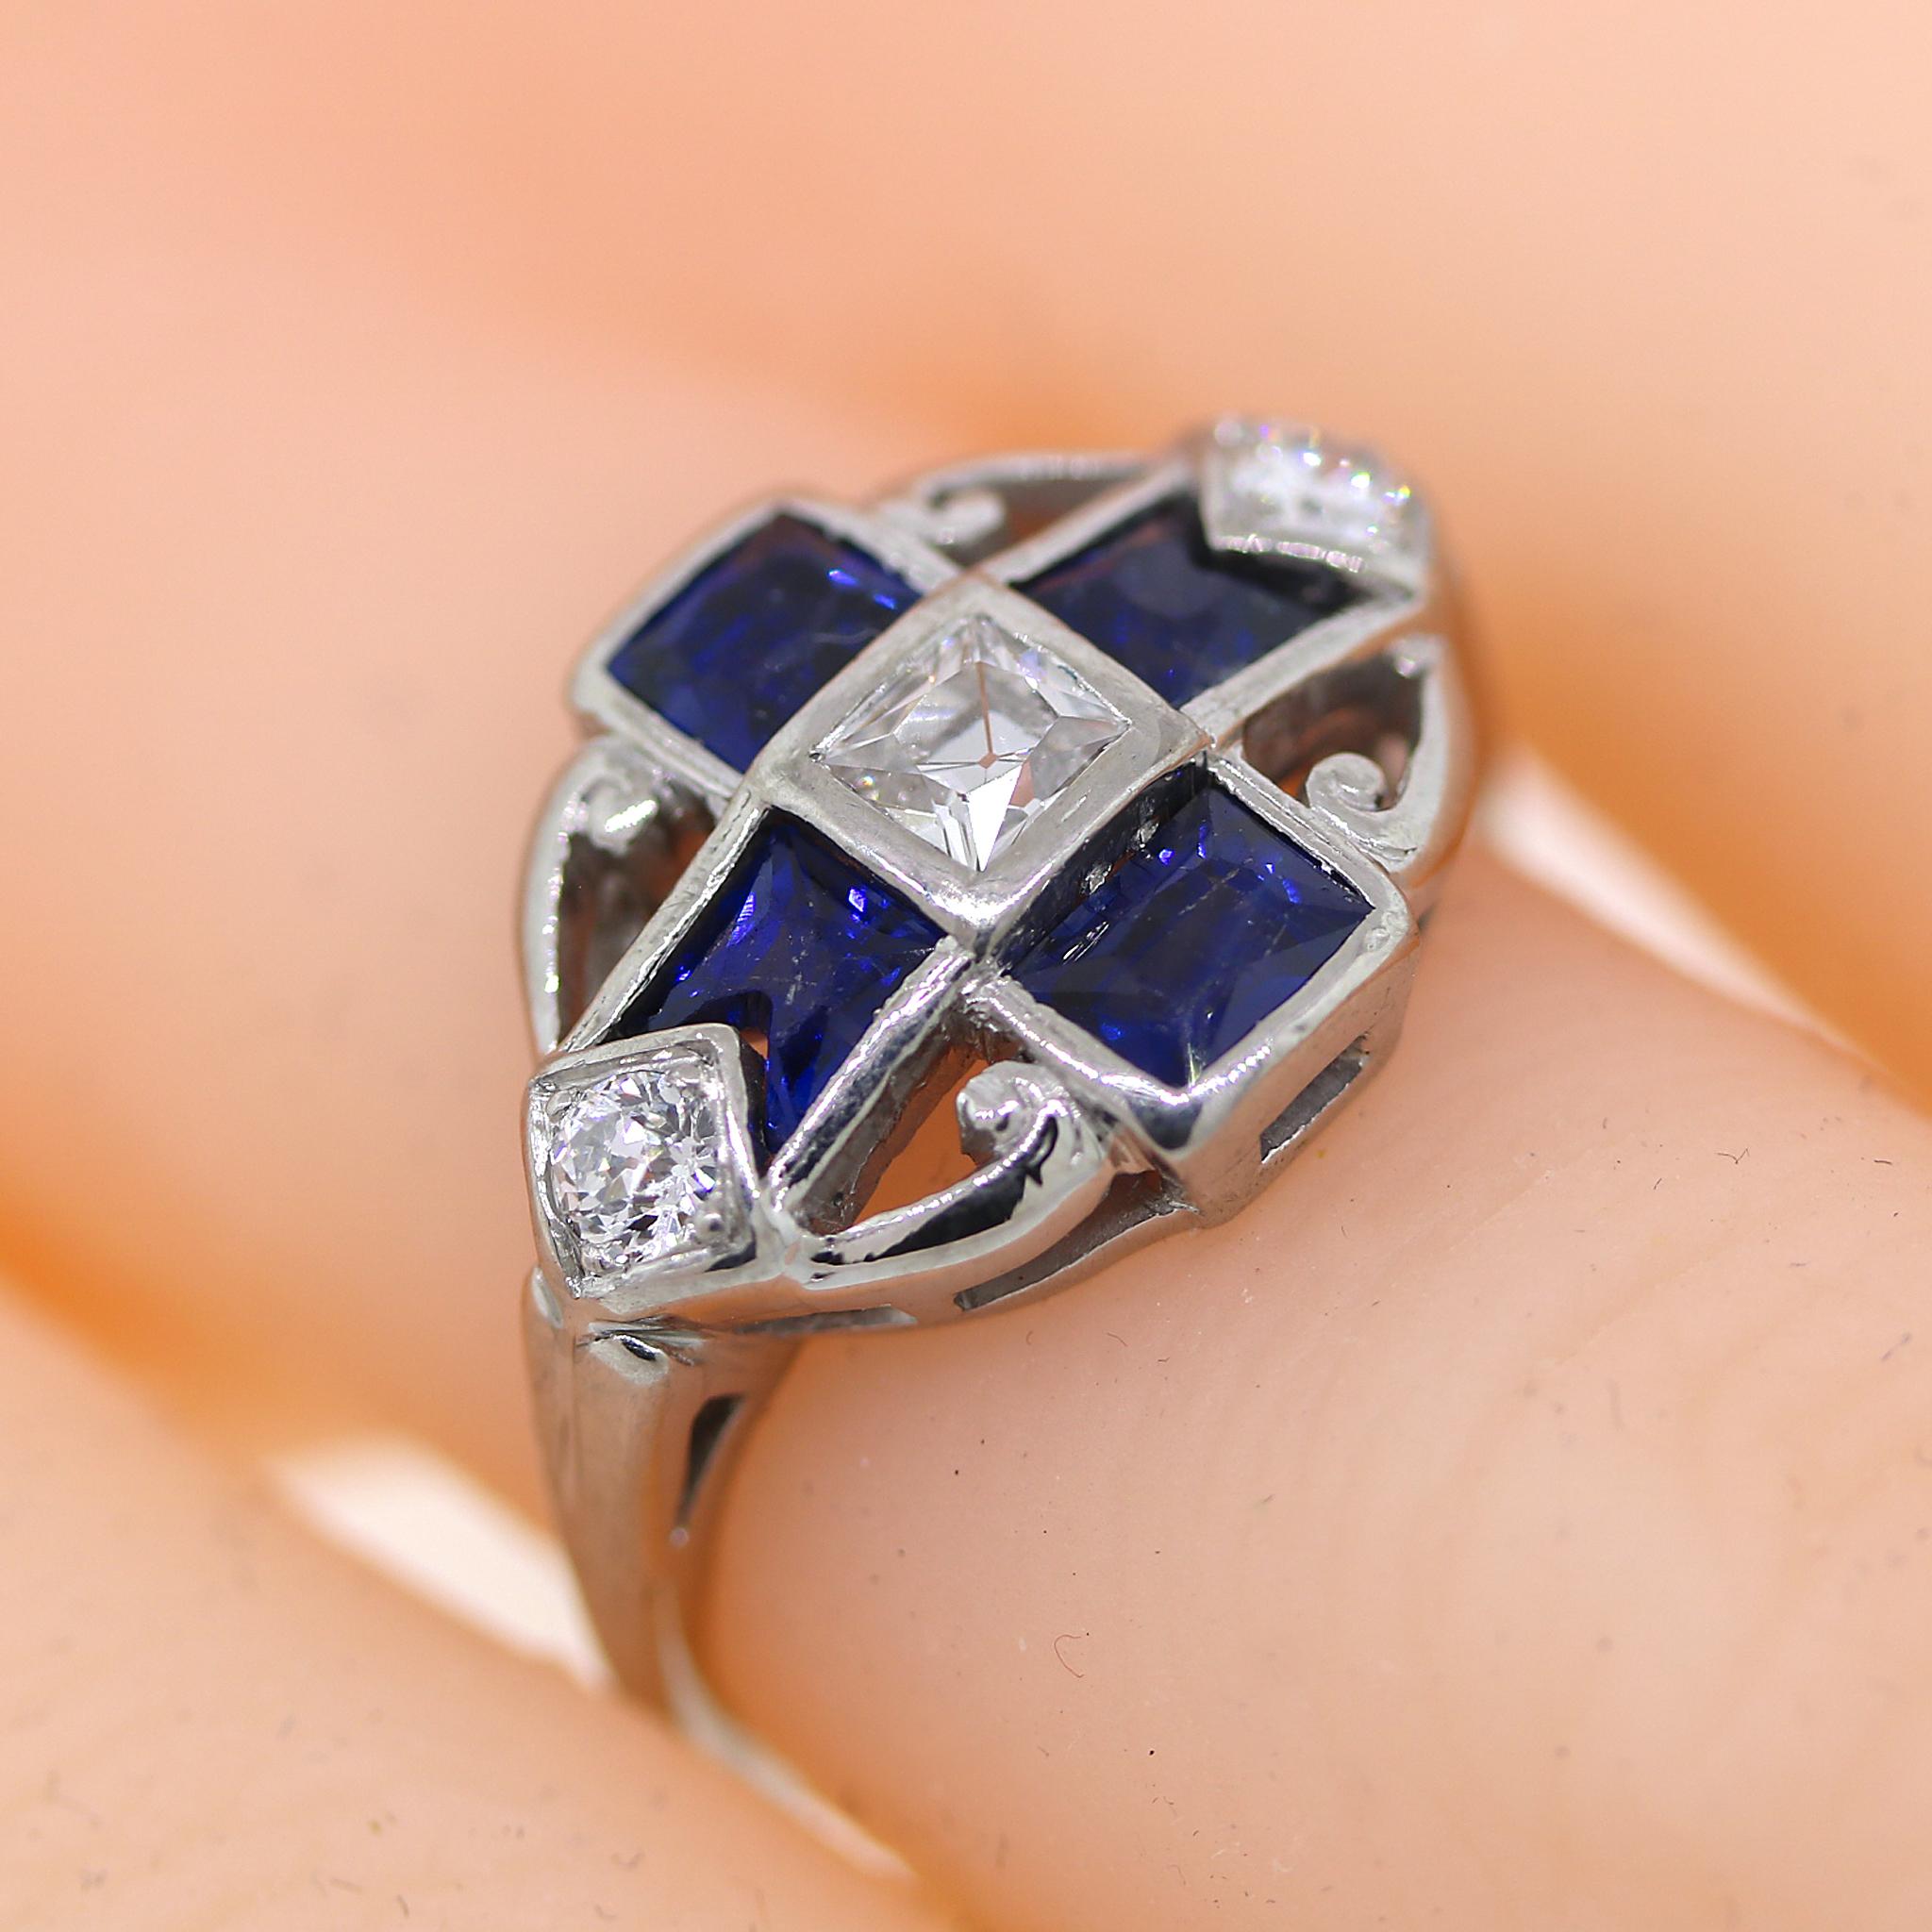 Platinum
Sapphire: 1 tcw
Diamond: 0.50 ct twd
Ring Size: 6
Total Weight: 4.65 grams